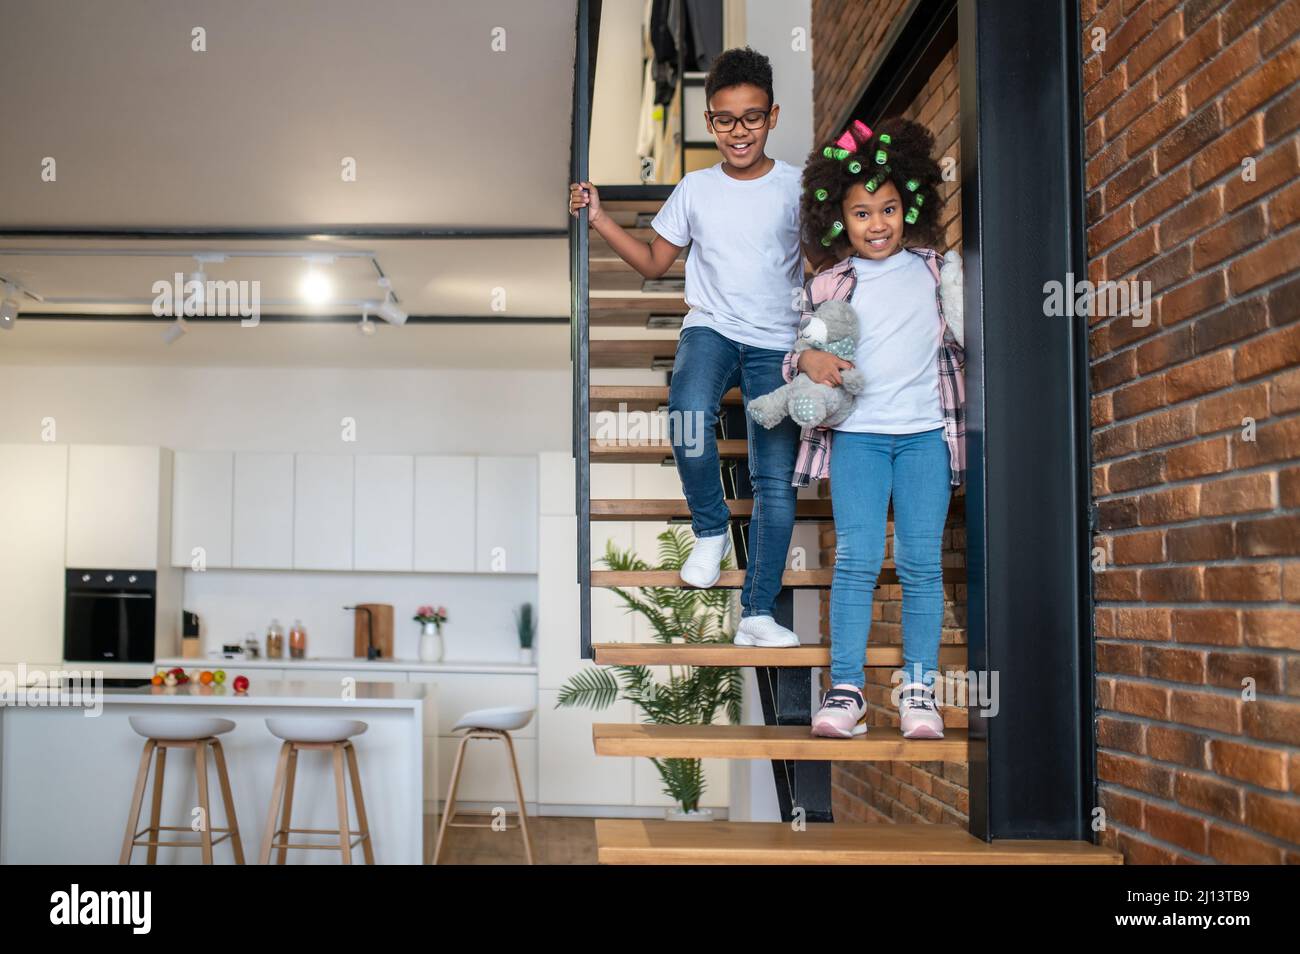 Boy and girl going down stairs at home Stock Photo